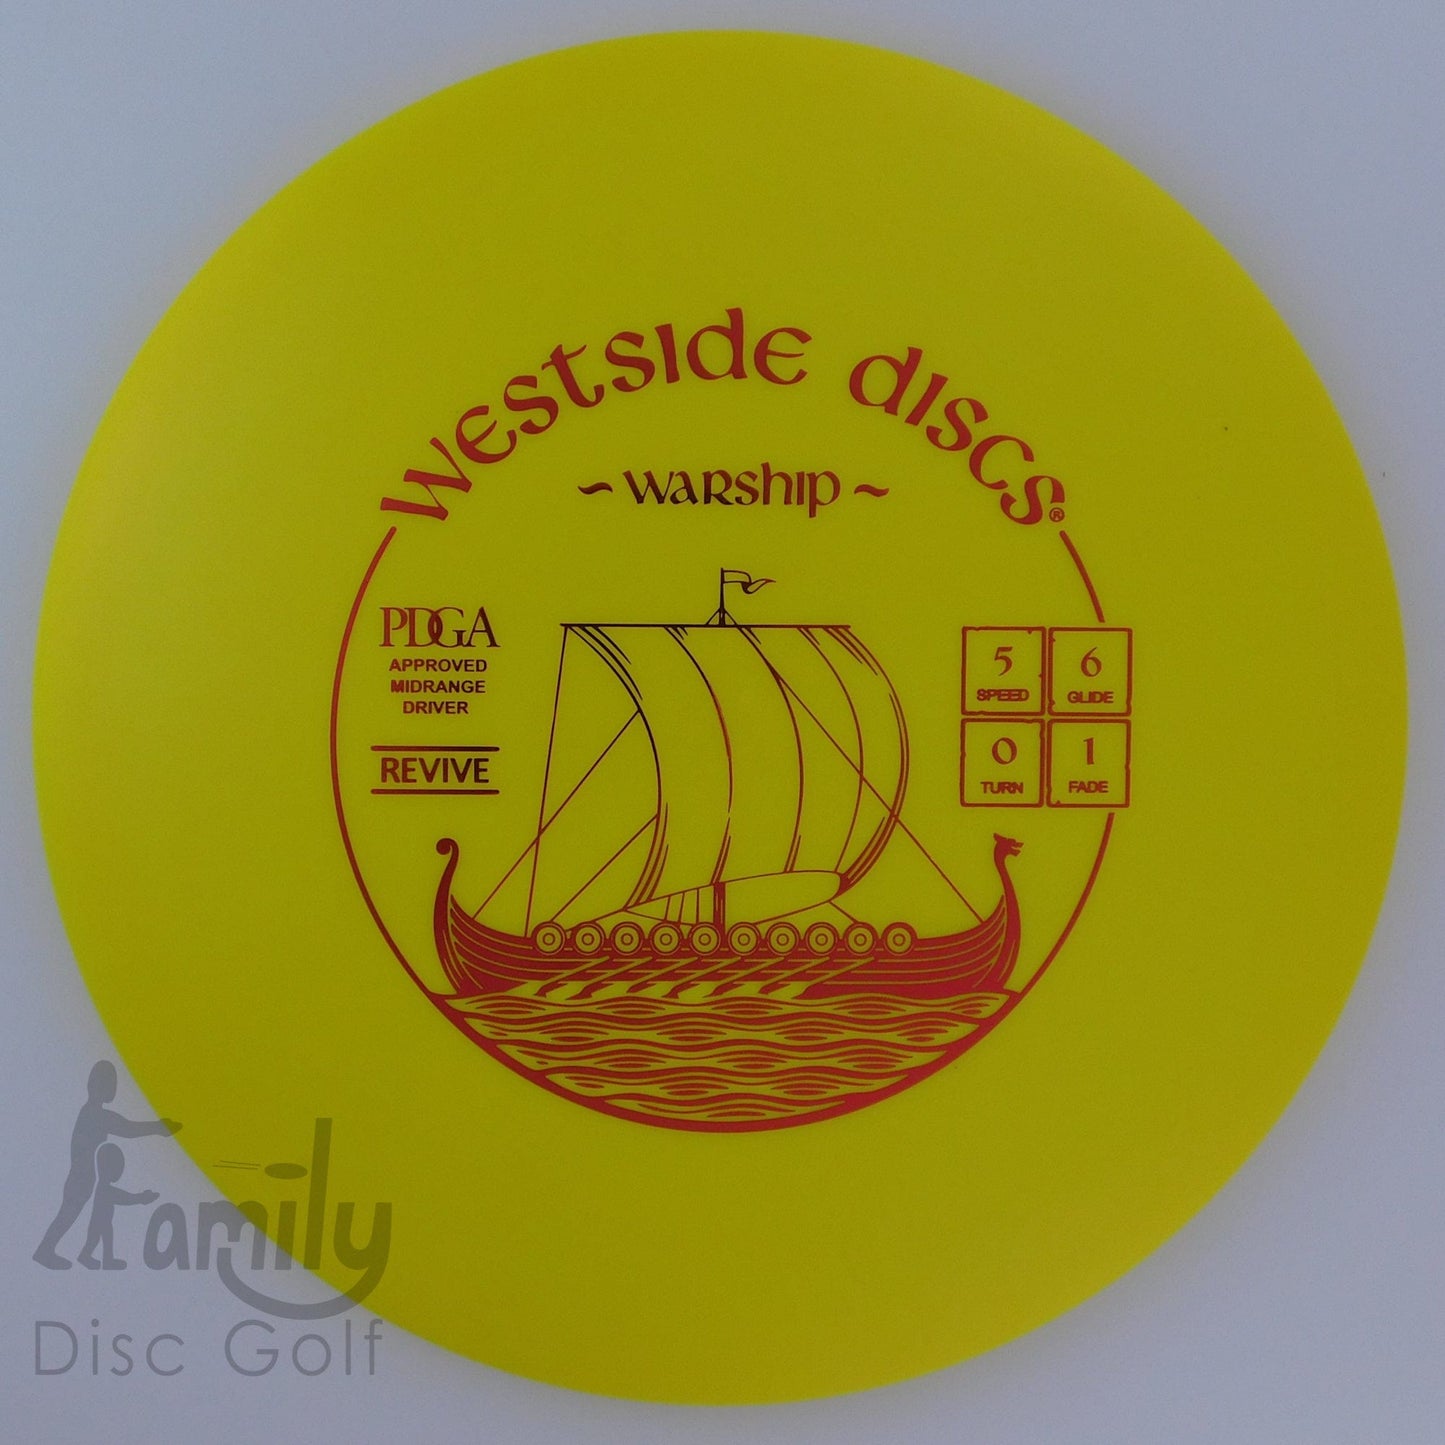 Westside Discs Warship - Revive 5│6│0│1 179g - Yellow - Westside Discs Warship - Revive - 101384